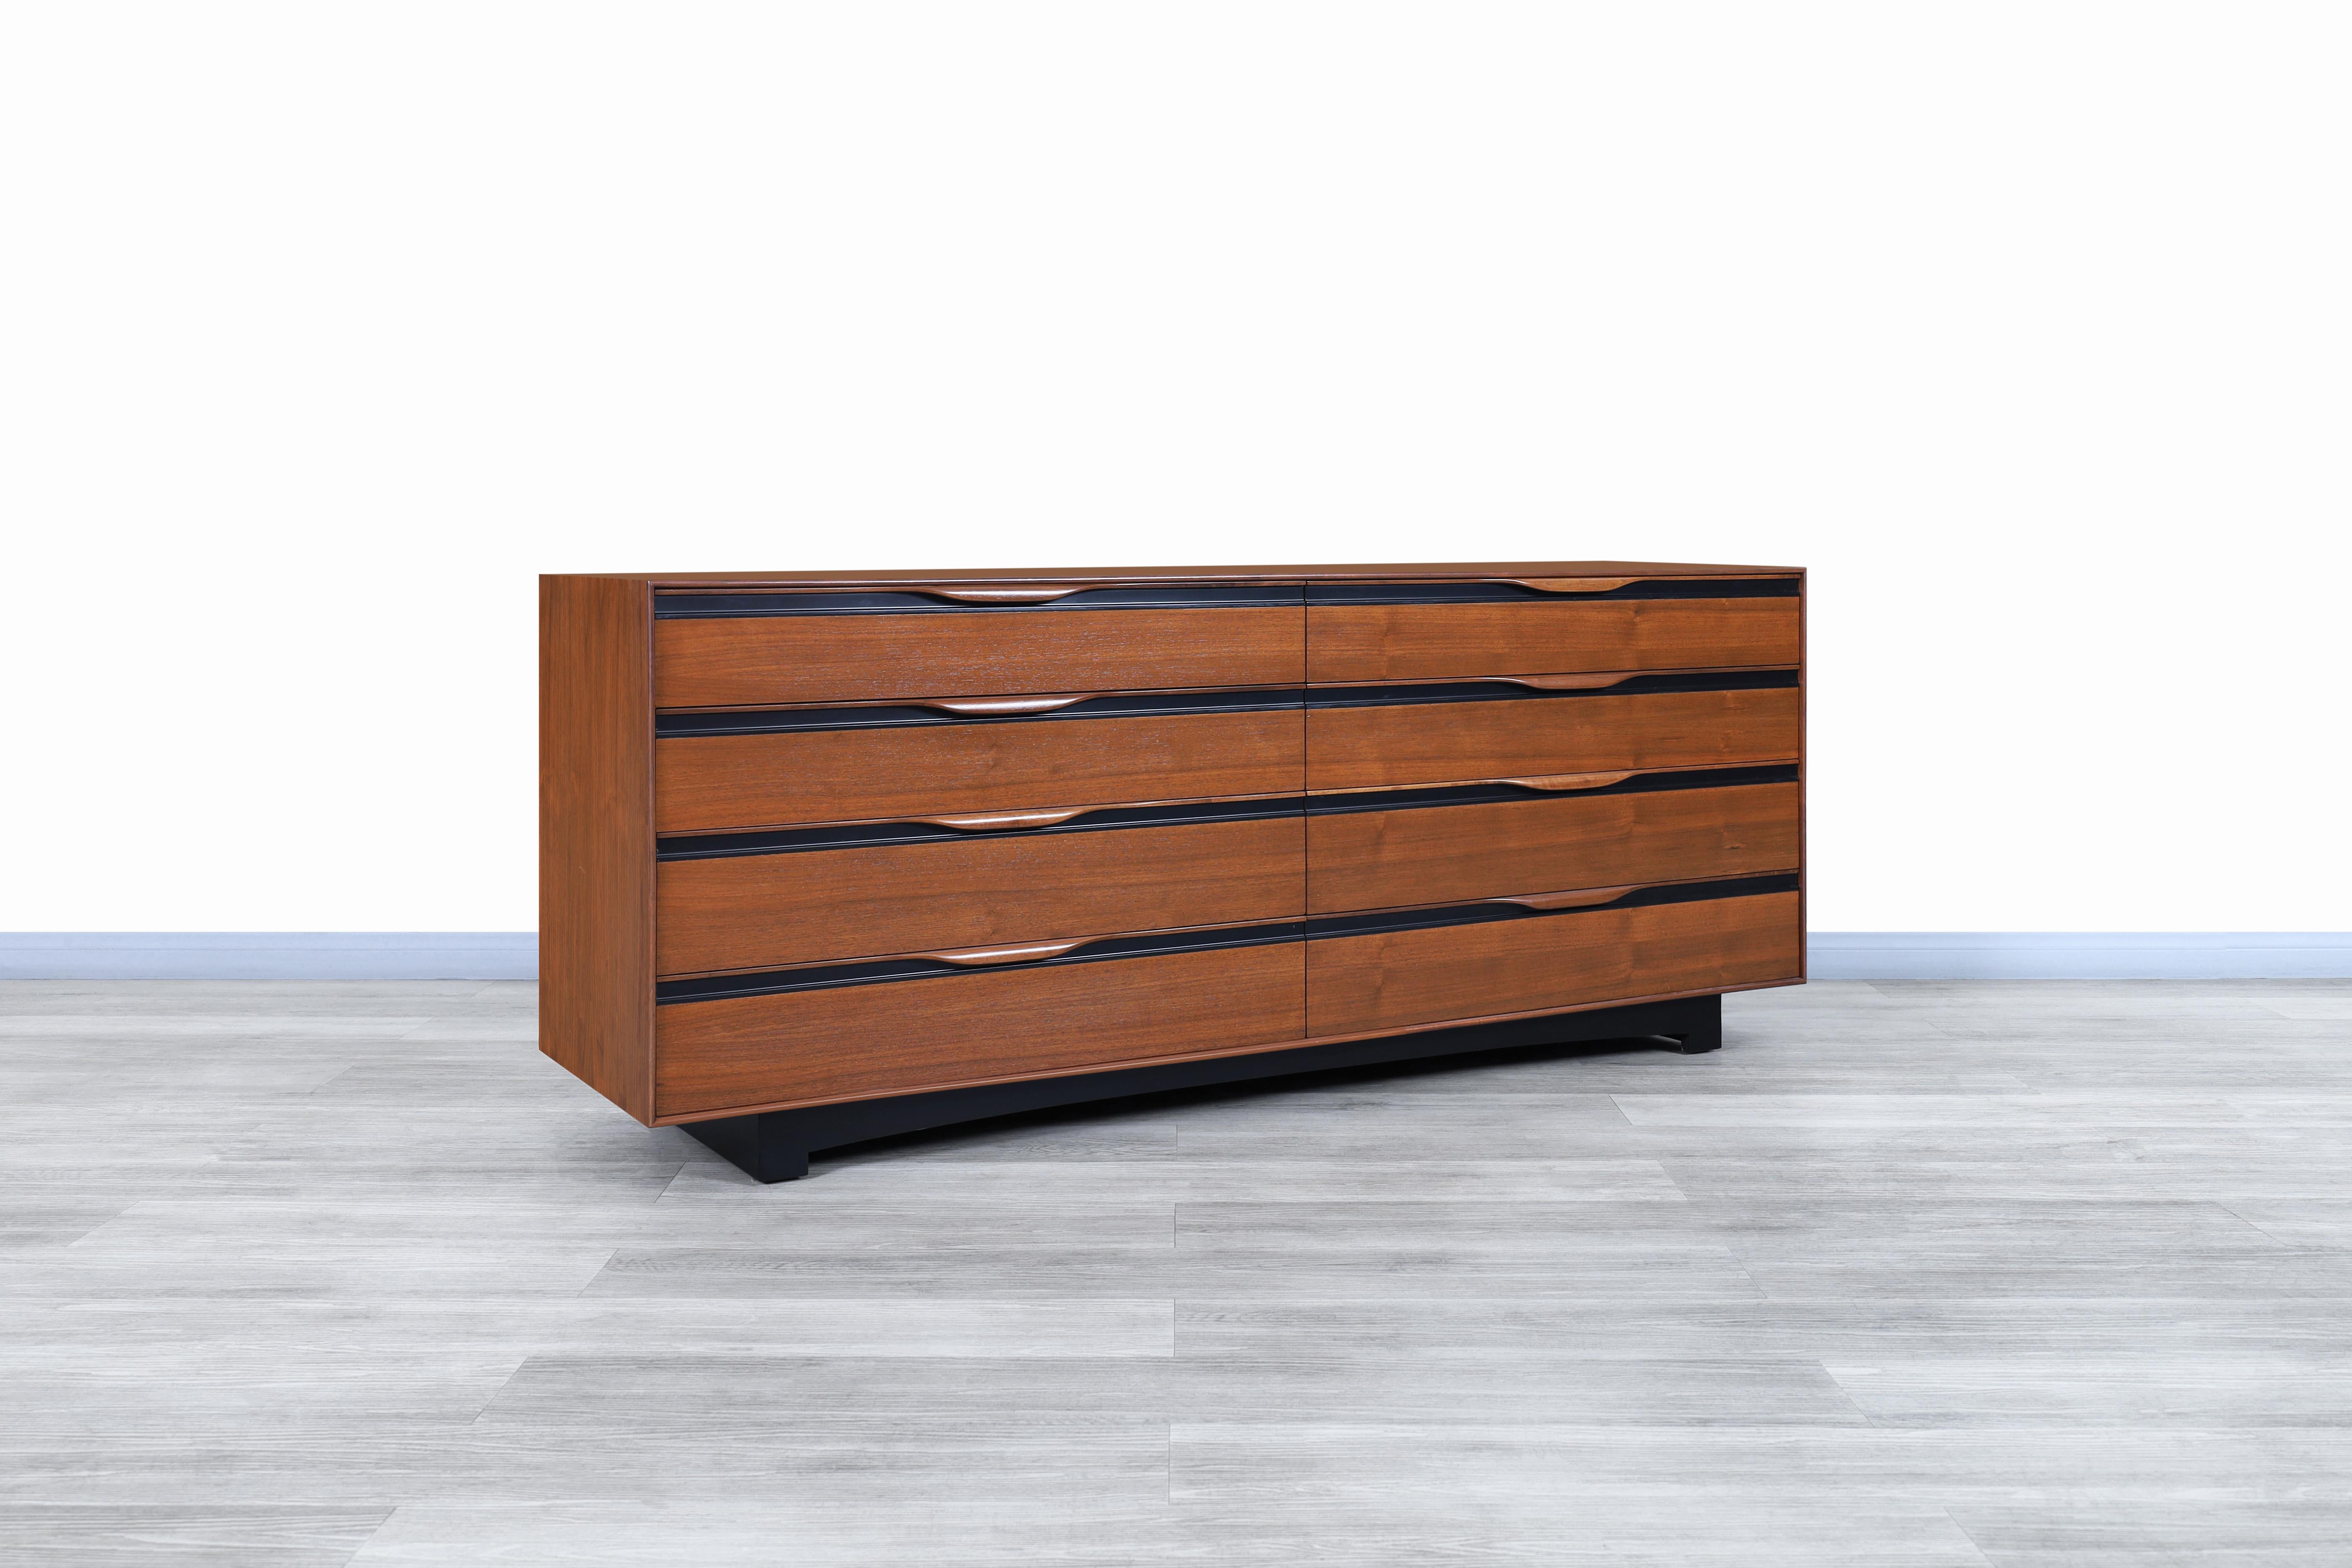 Fabulous vintage walnut dresser designed by John Kapel for Glenn of California in the United States, circa 1950s. This dresser is constructed from fine walnut wood that highlights its beautiful grain. Features a total of 8 large drawers for optimal